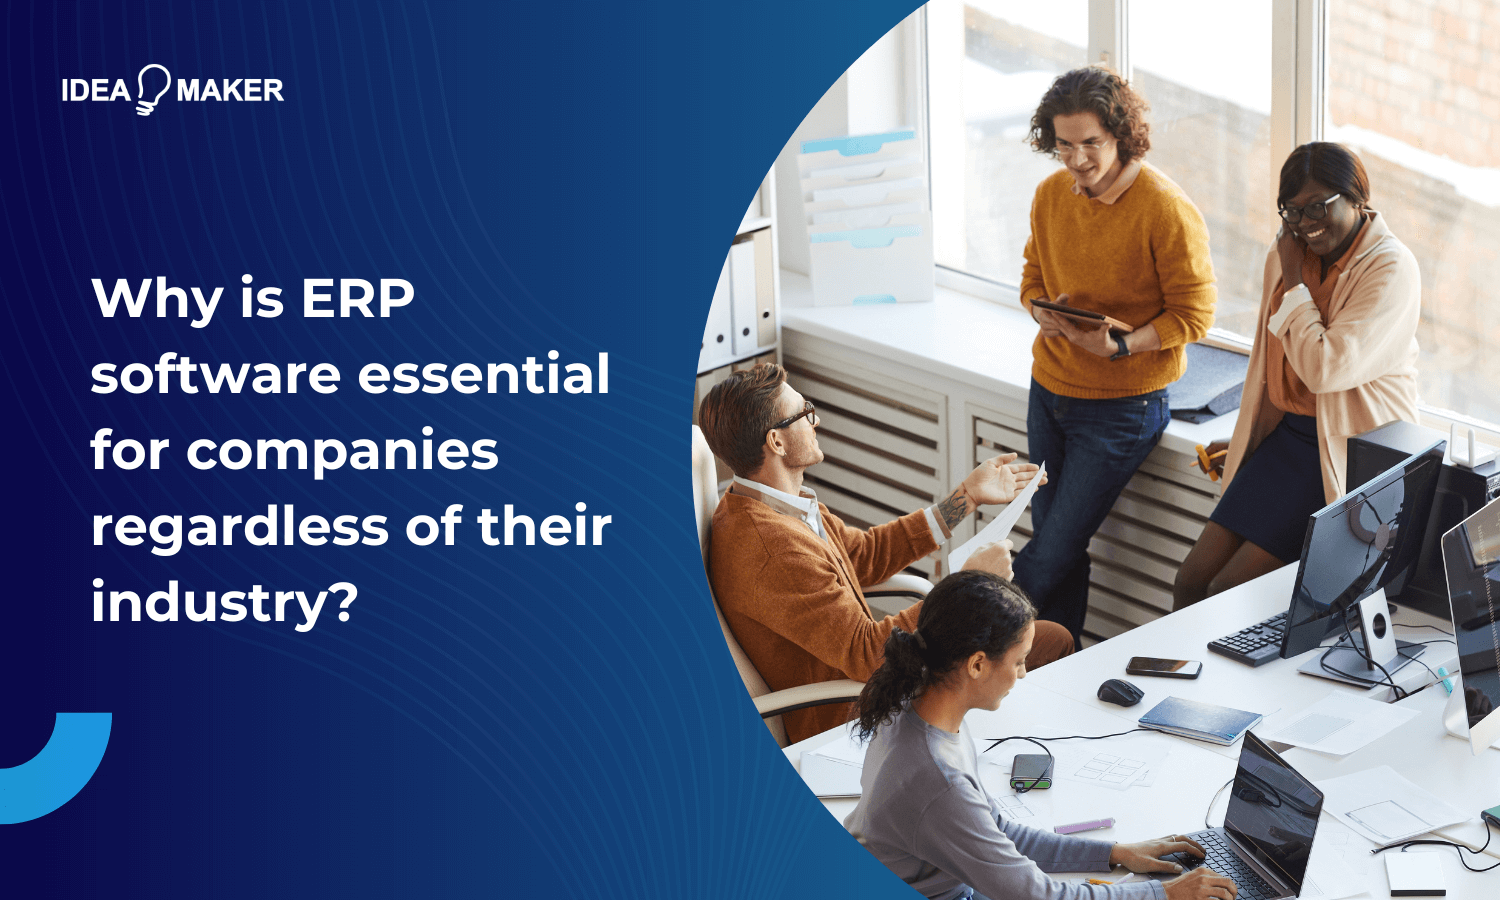 Why Is ERP Software Essential for Companies Regardless of Their Industry?